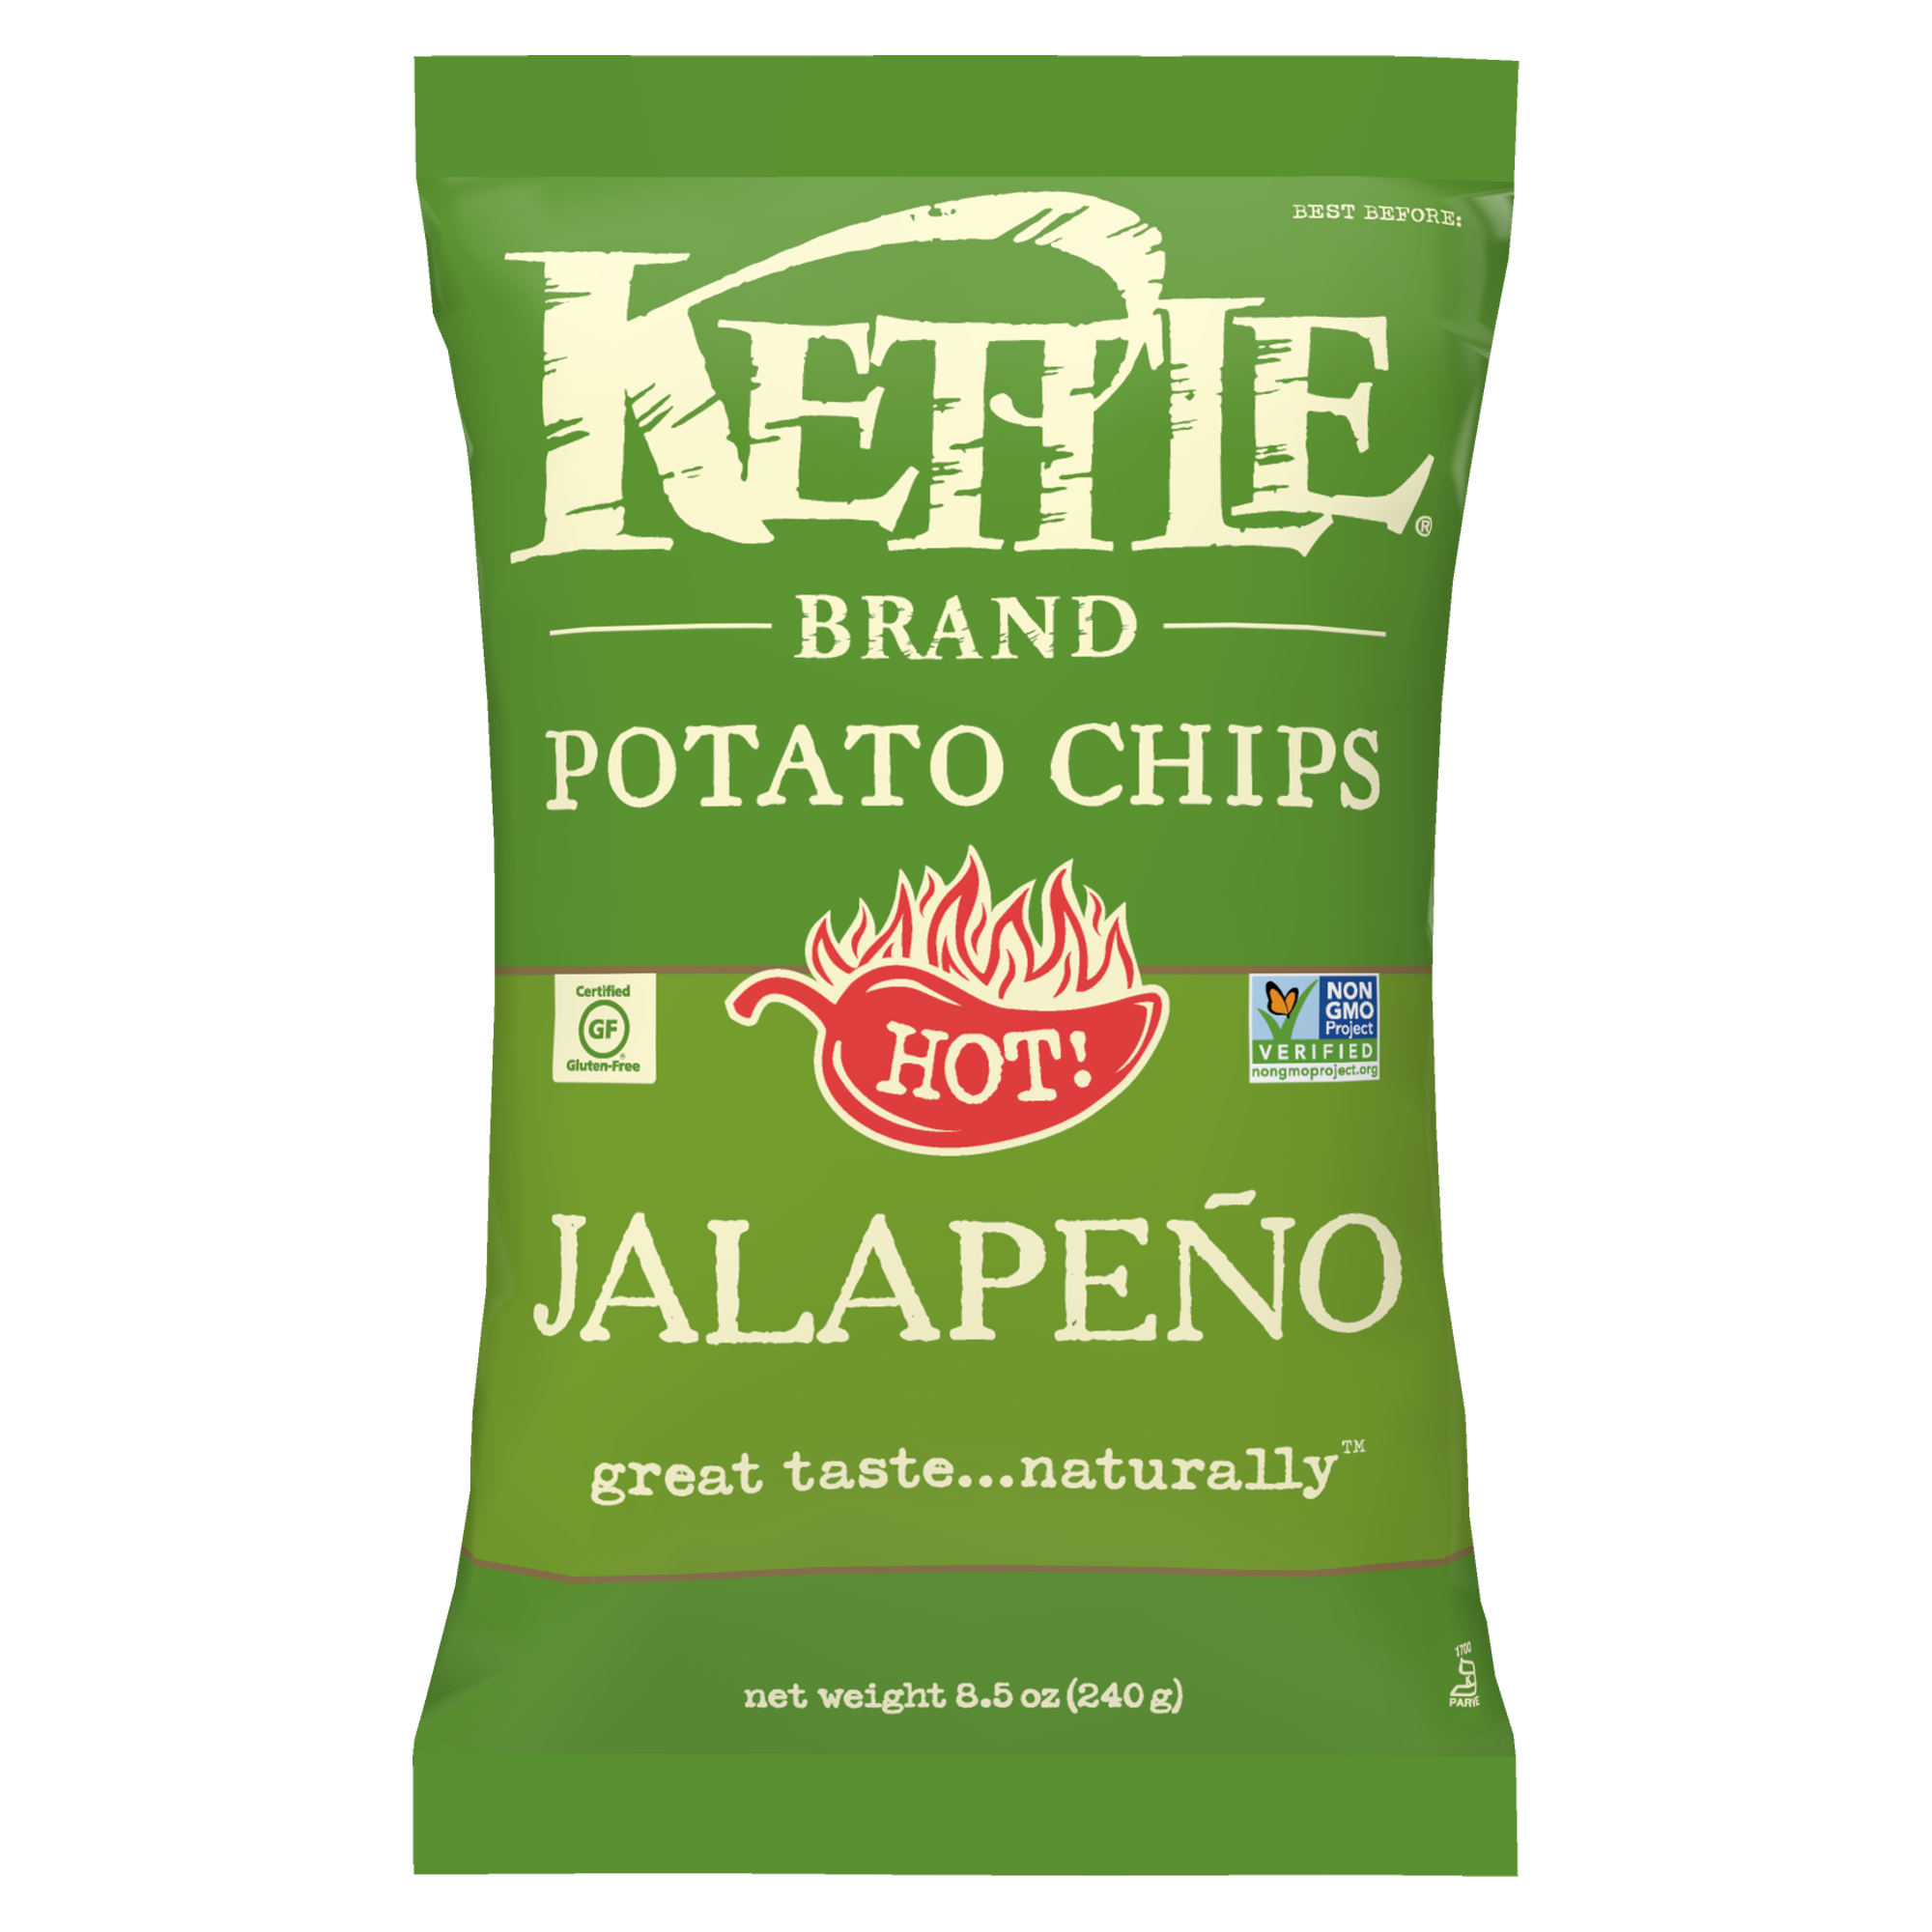 Our Products - Kettle Brand